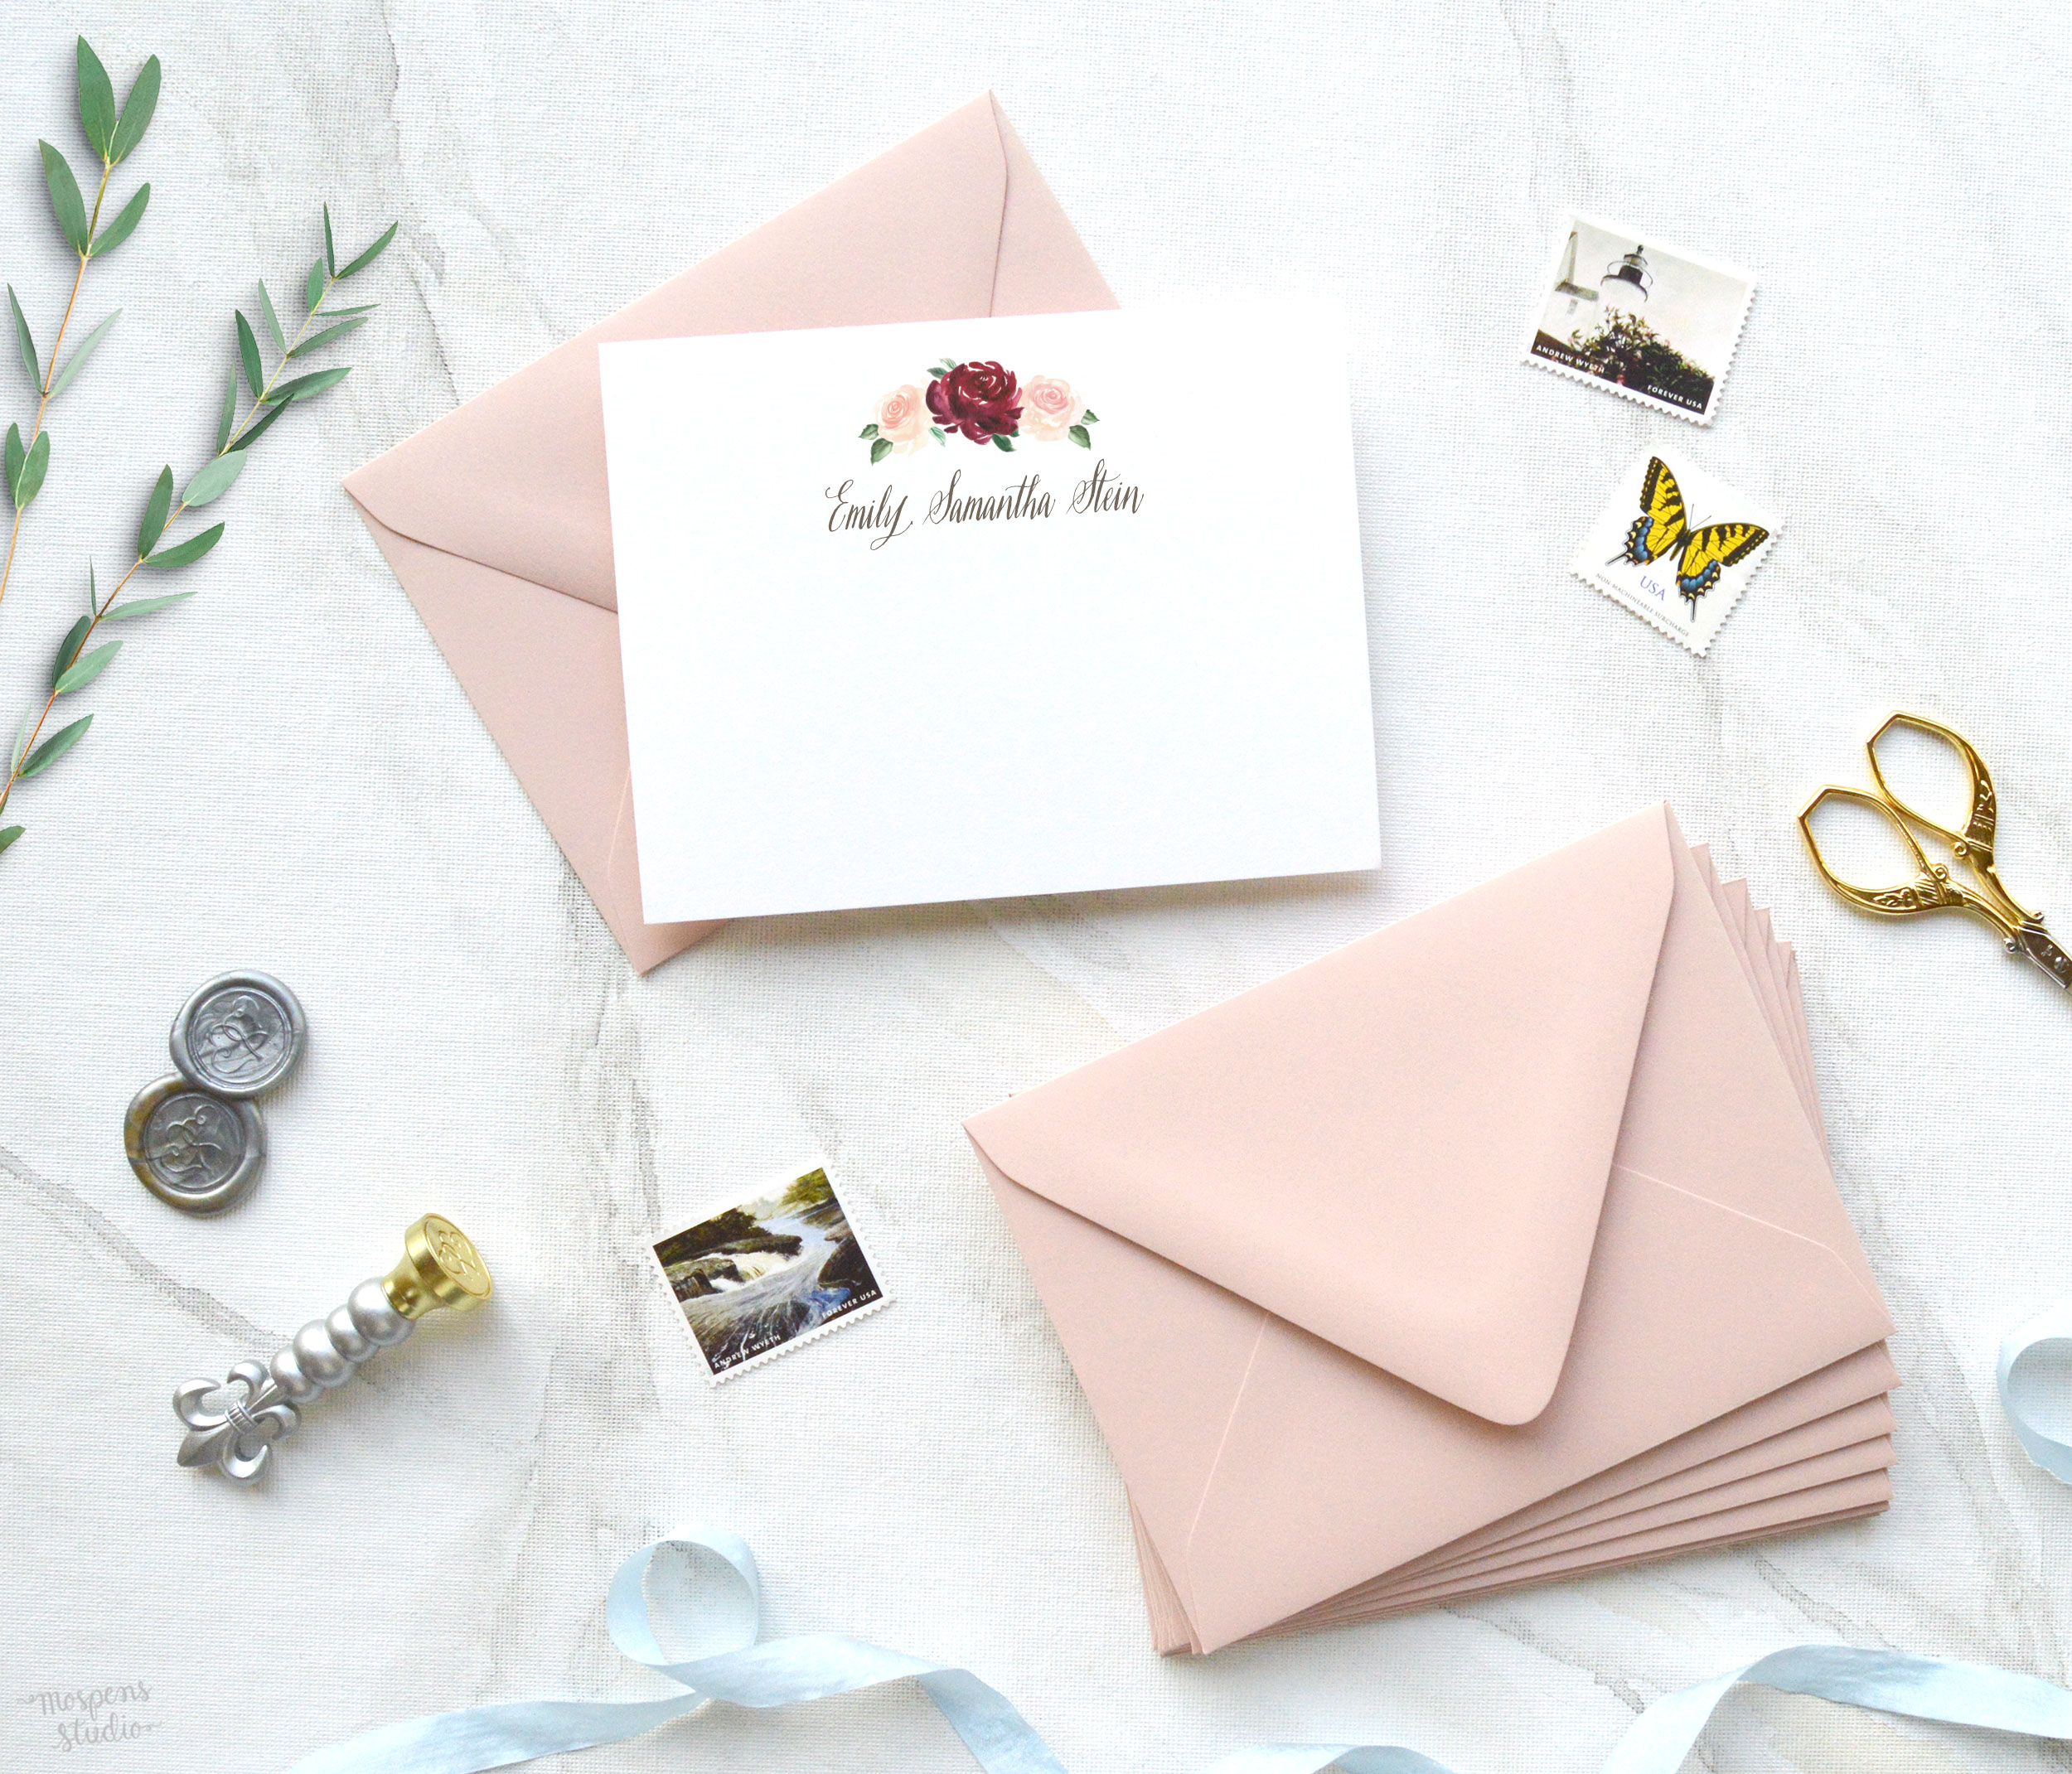 Personalized Stationery & Custom Note Cards